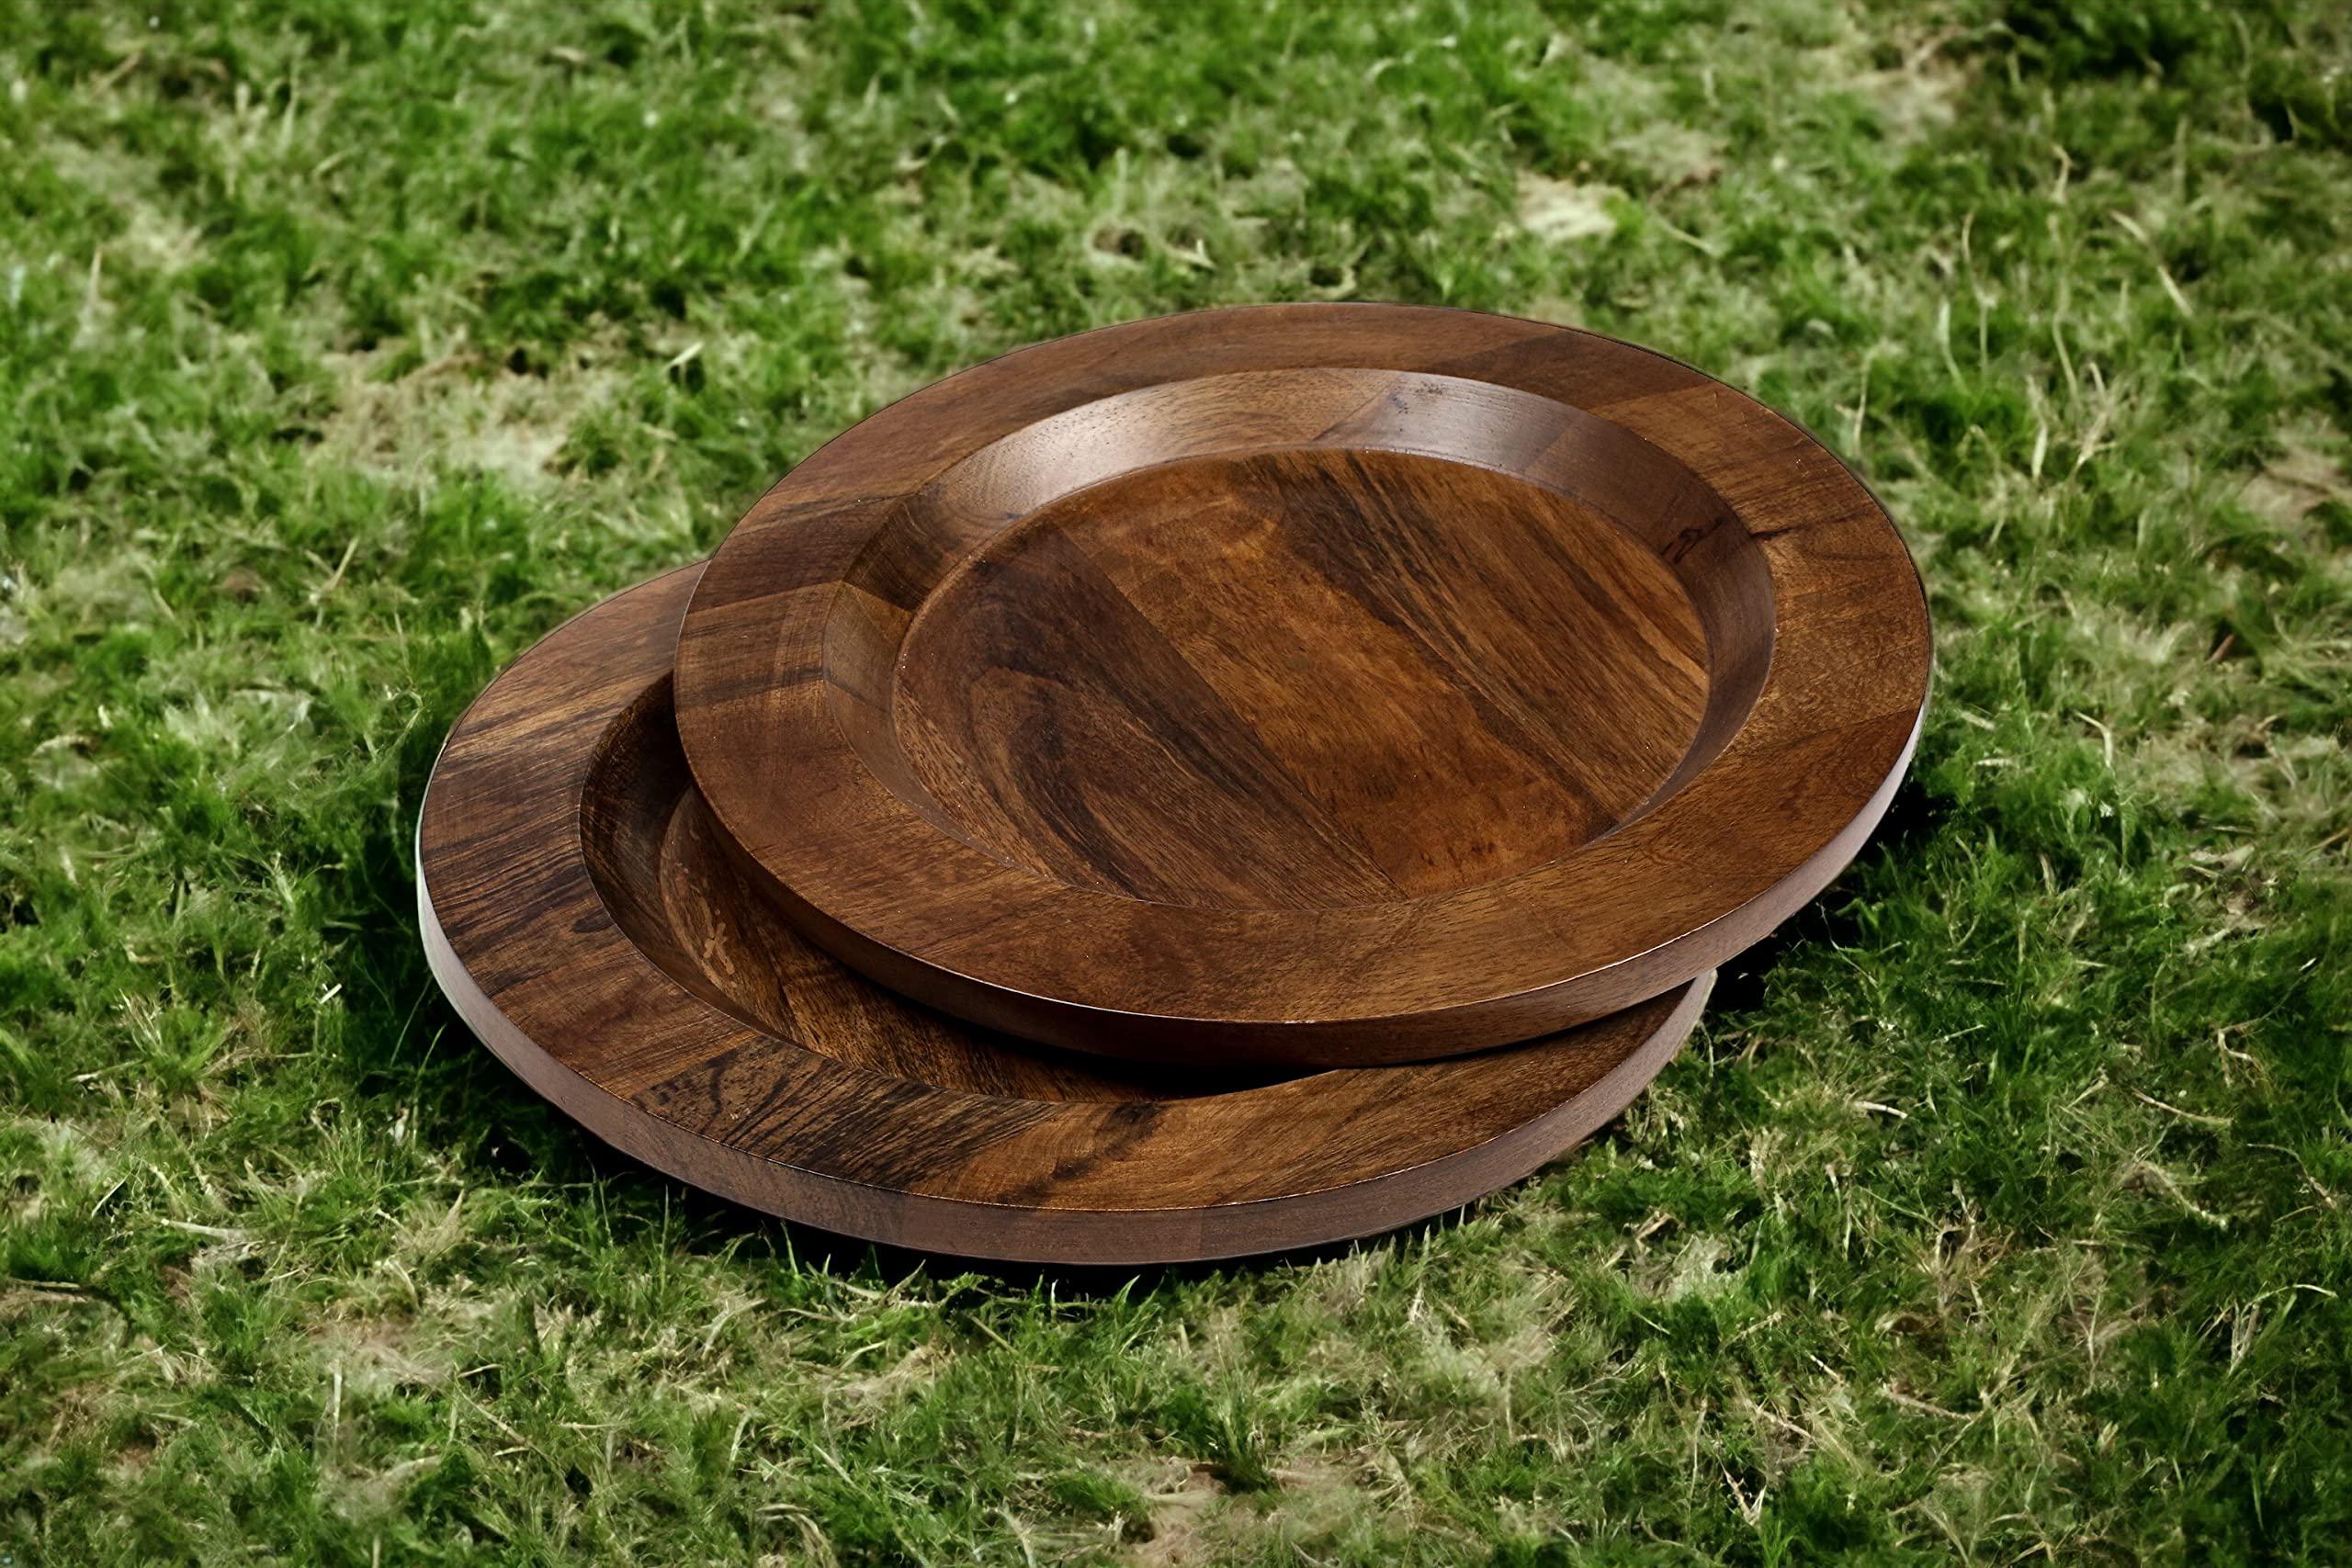 alpha living home wood charger plate, wood charger plate sets, wood chargers for dinner plates, wood placemats, chargers for 